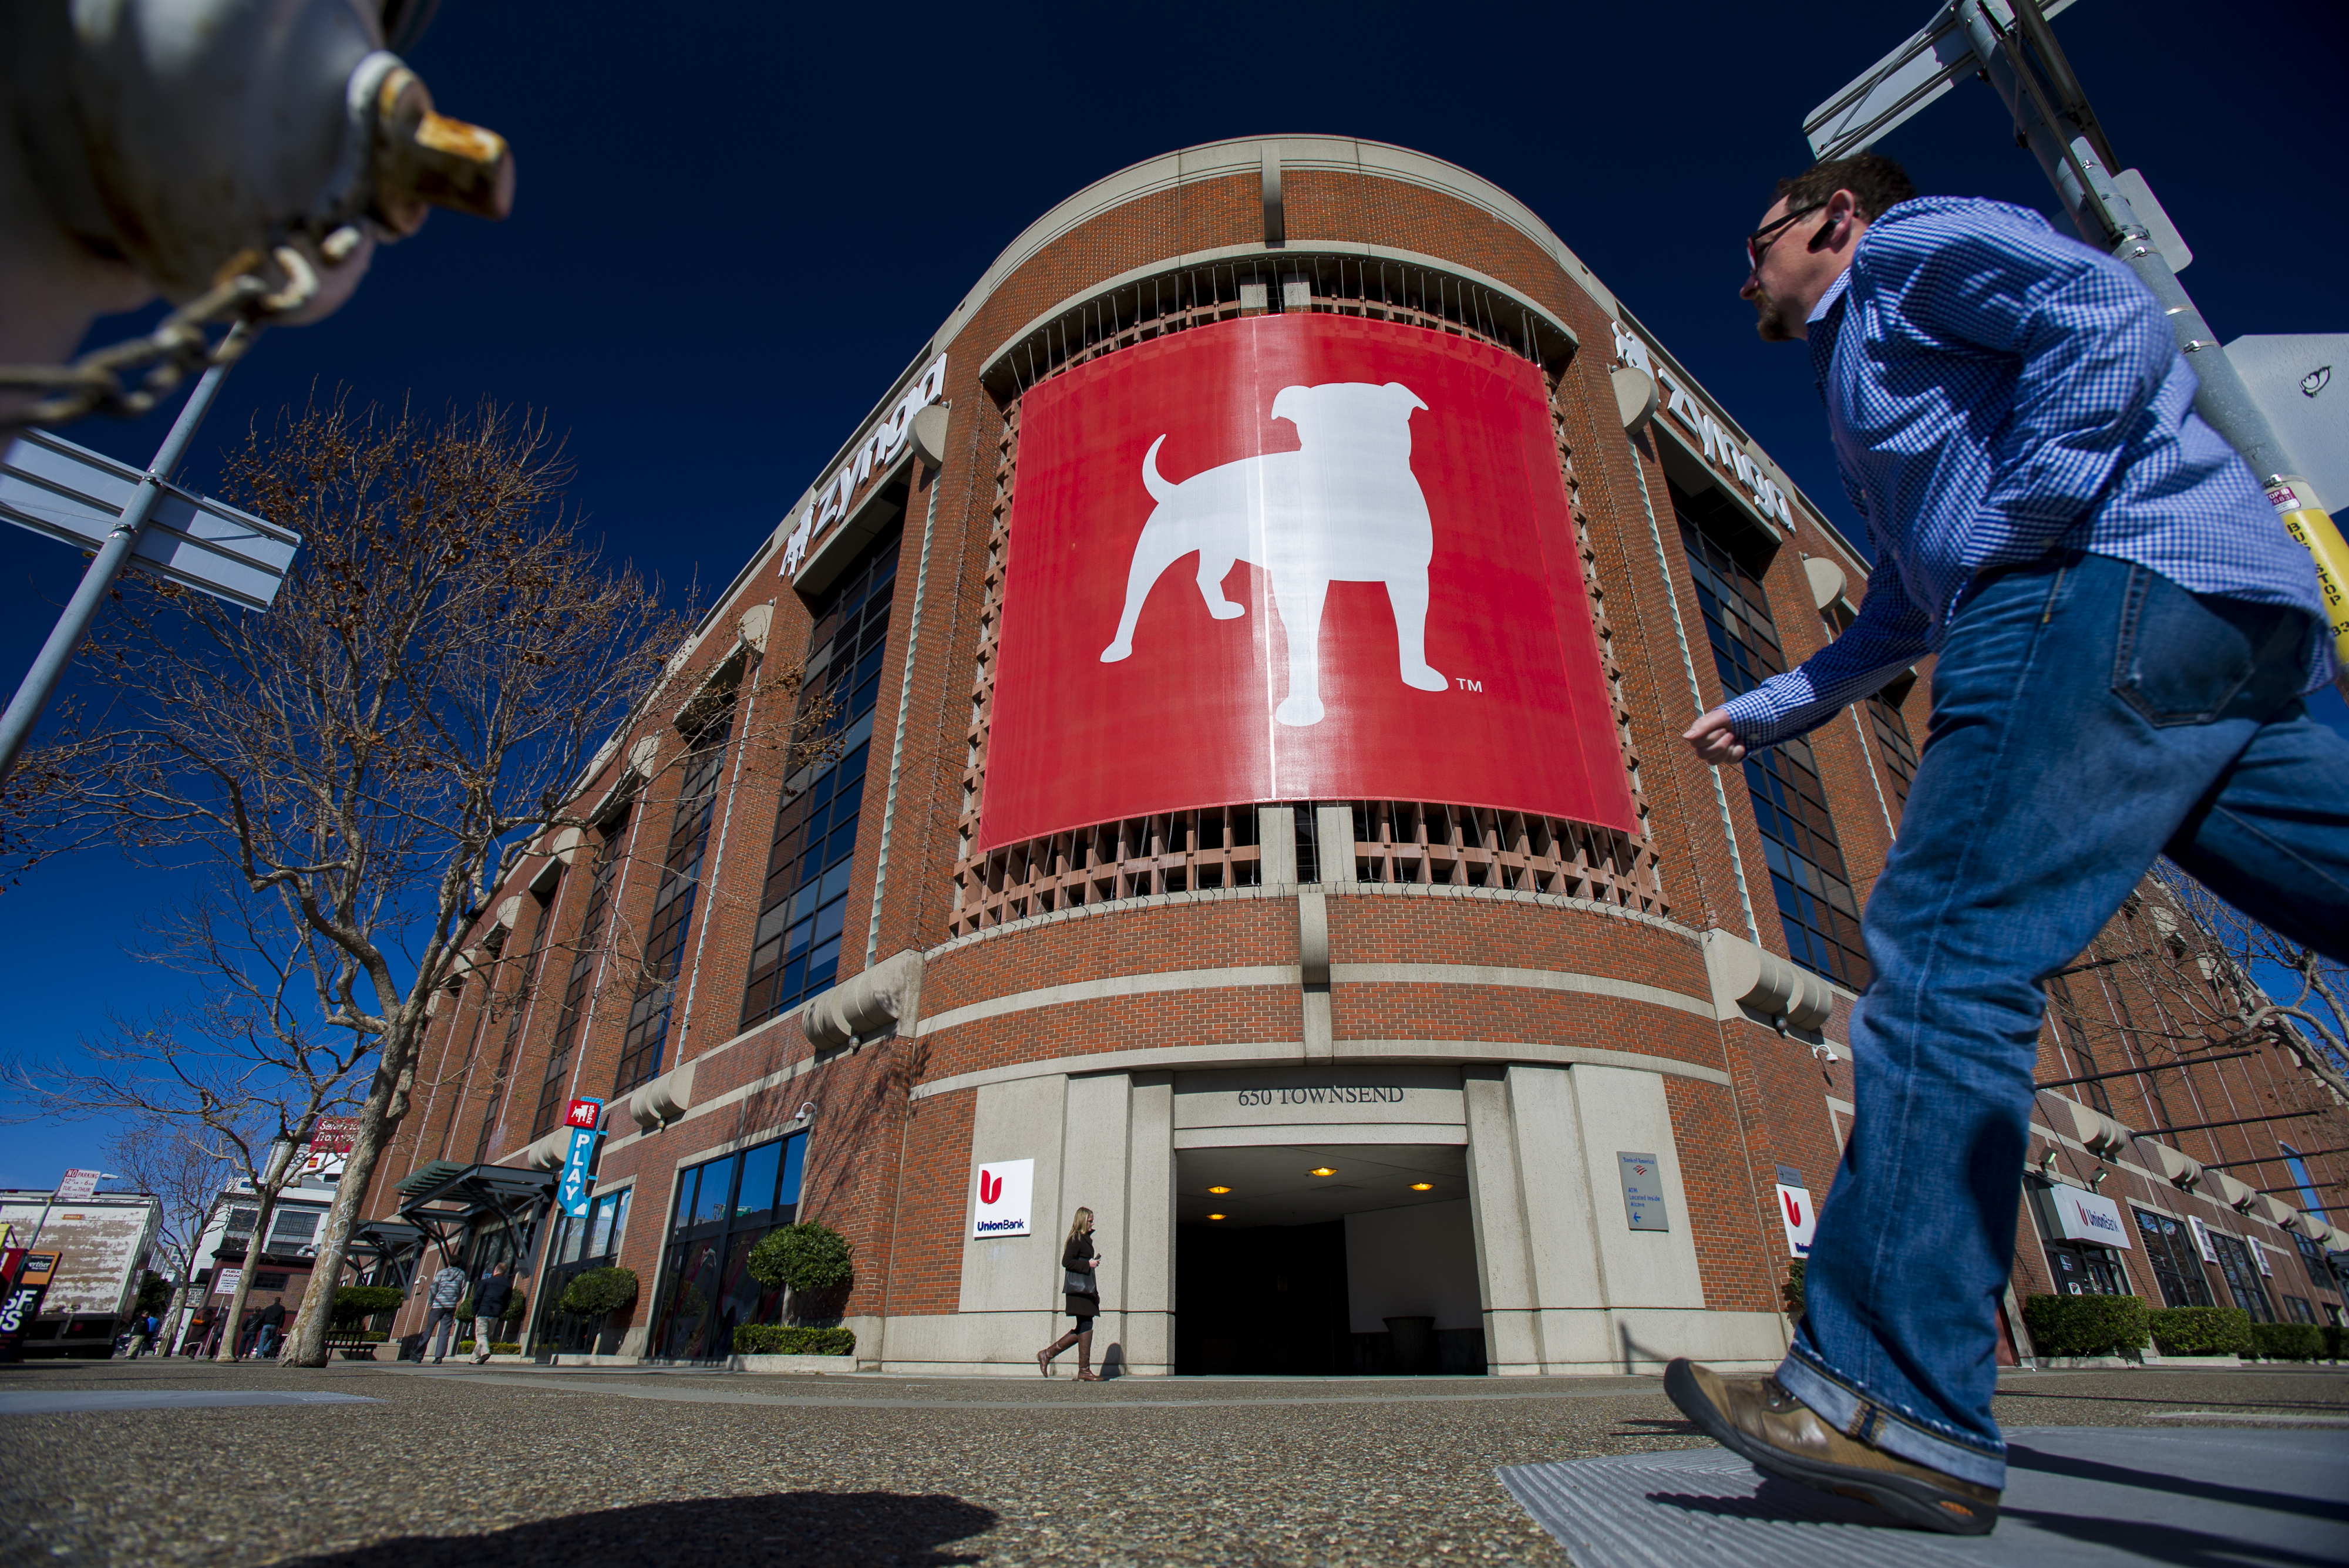 Zynga Buys Rival to Bolster Role in Mobile Games, Cuts Jobs